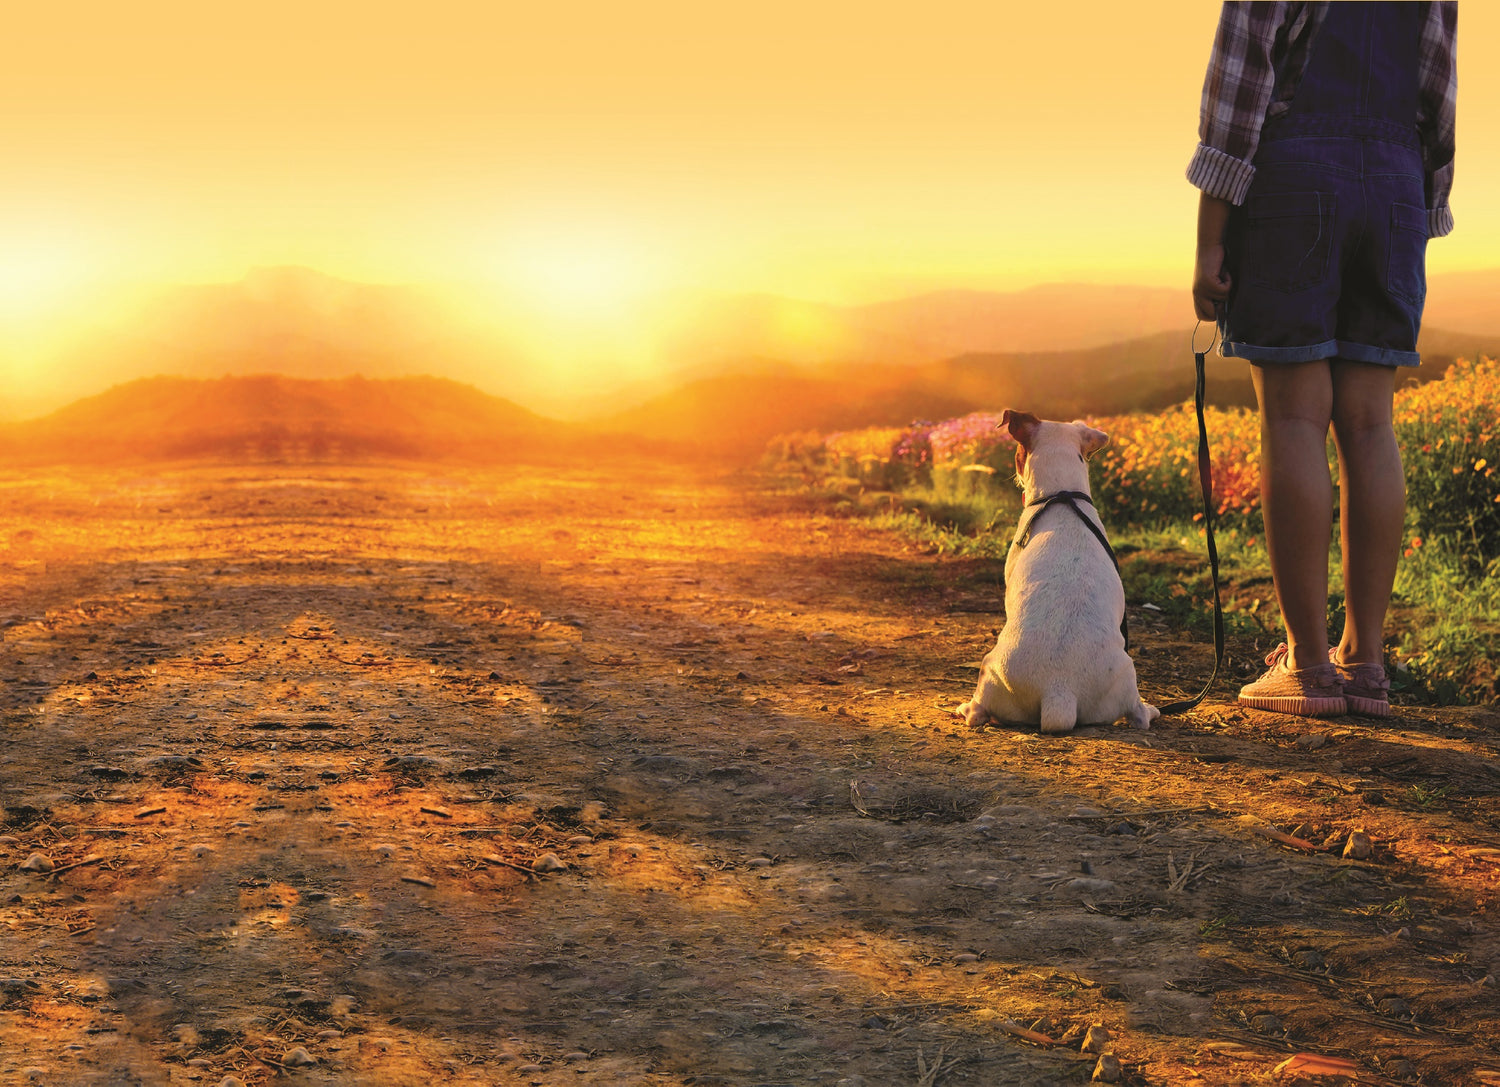 Dog on leash, overlooking a sunset.